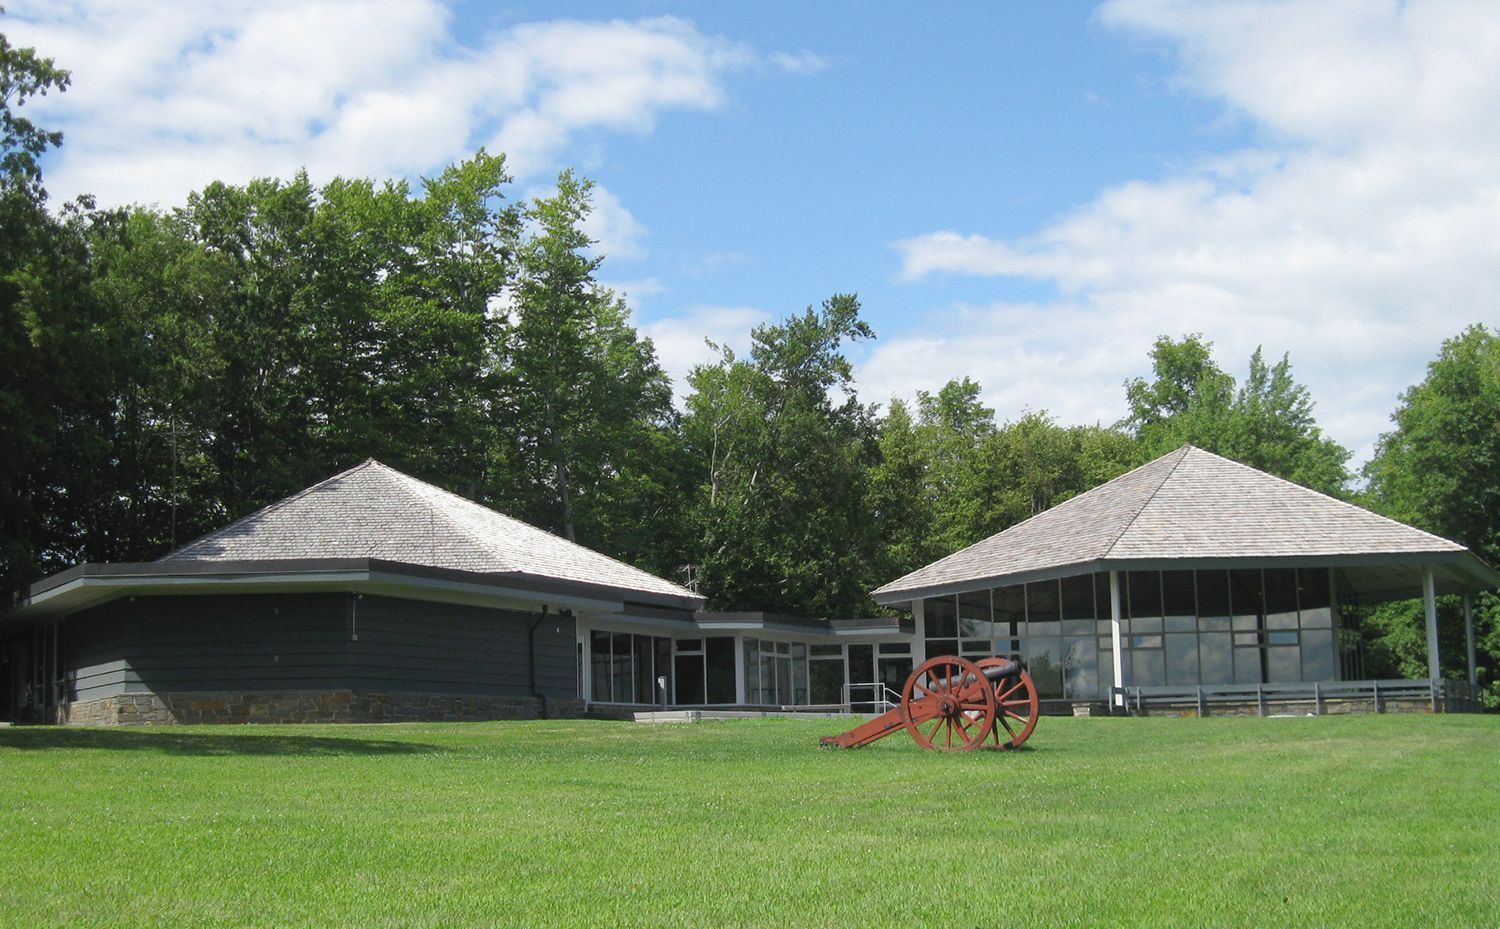 Our Visitor Center boasts a scenic view overlooking part of the Battlefield.